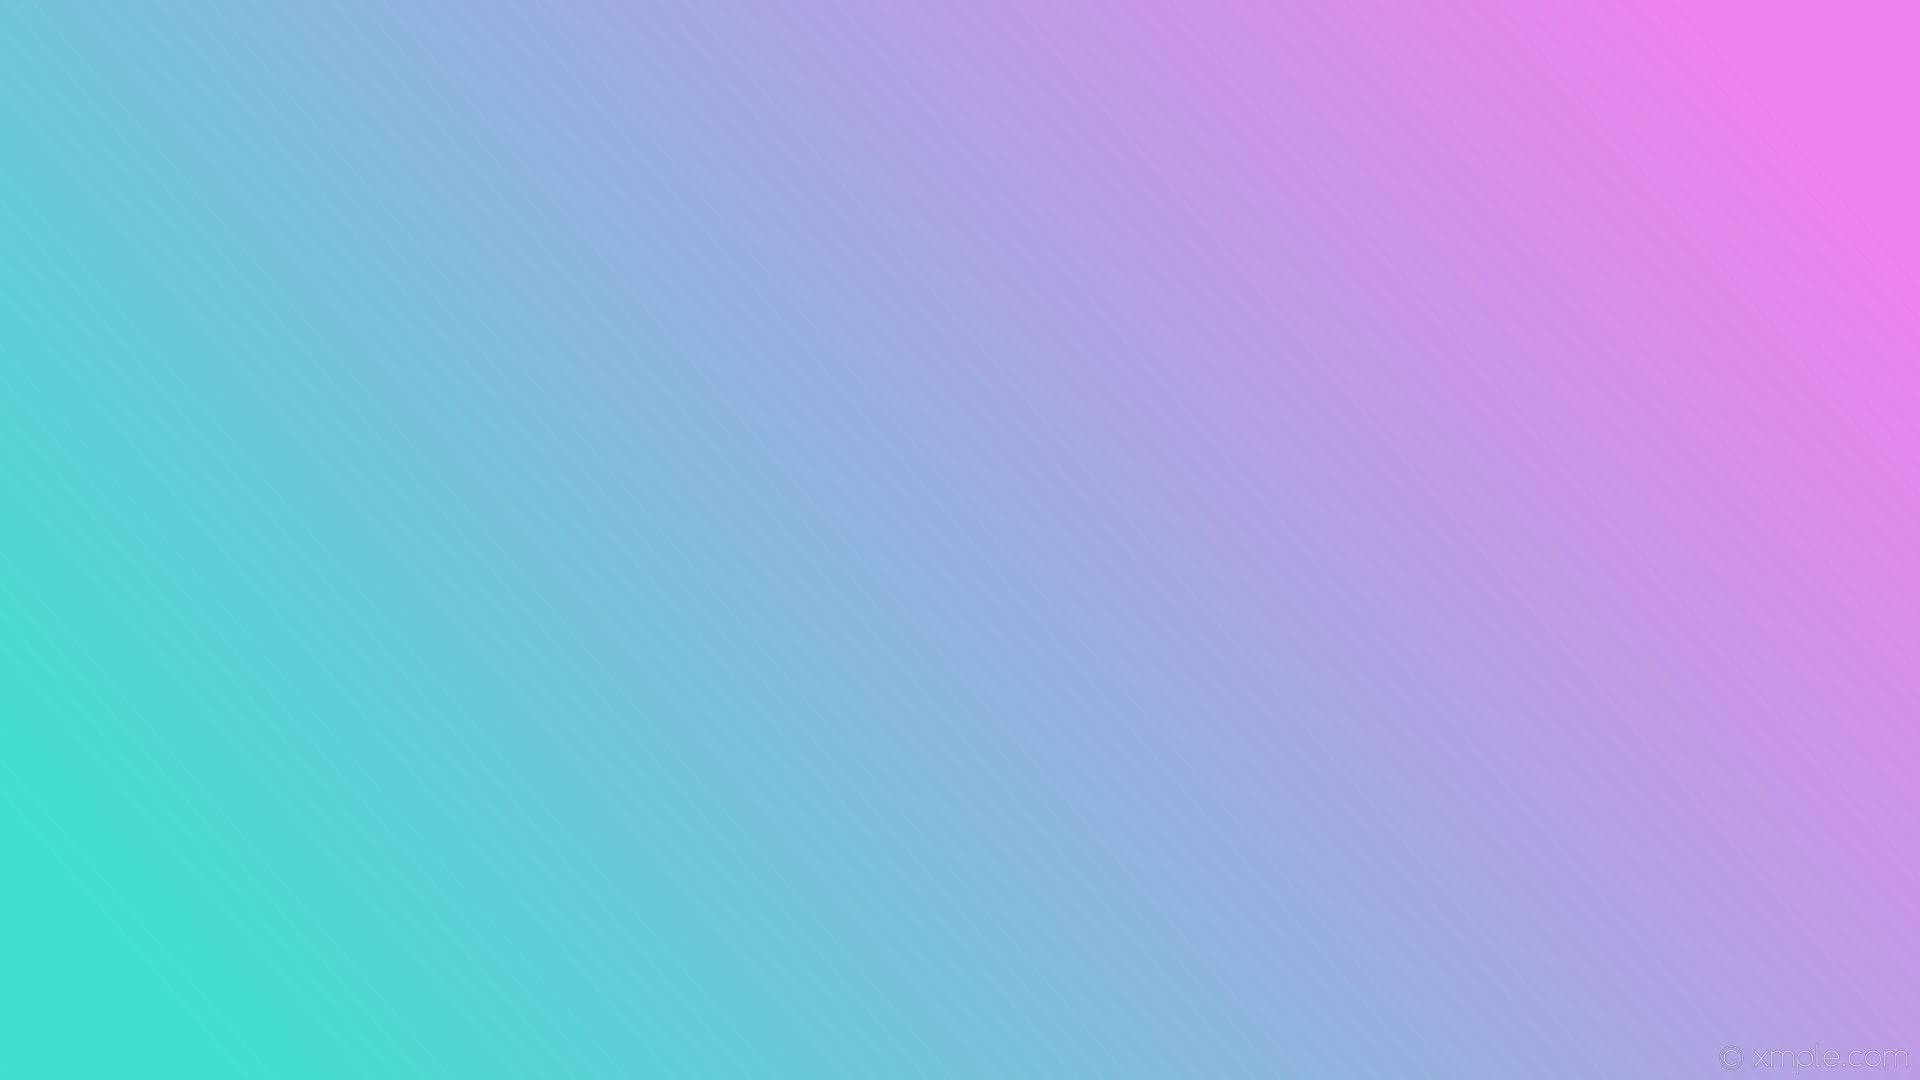 A Pastel Teal Background Wallpaper